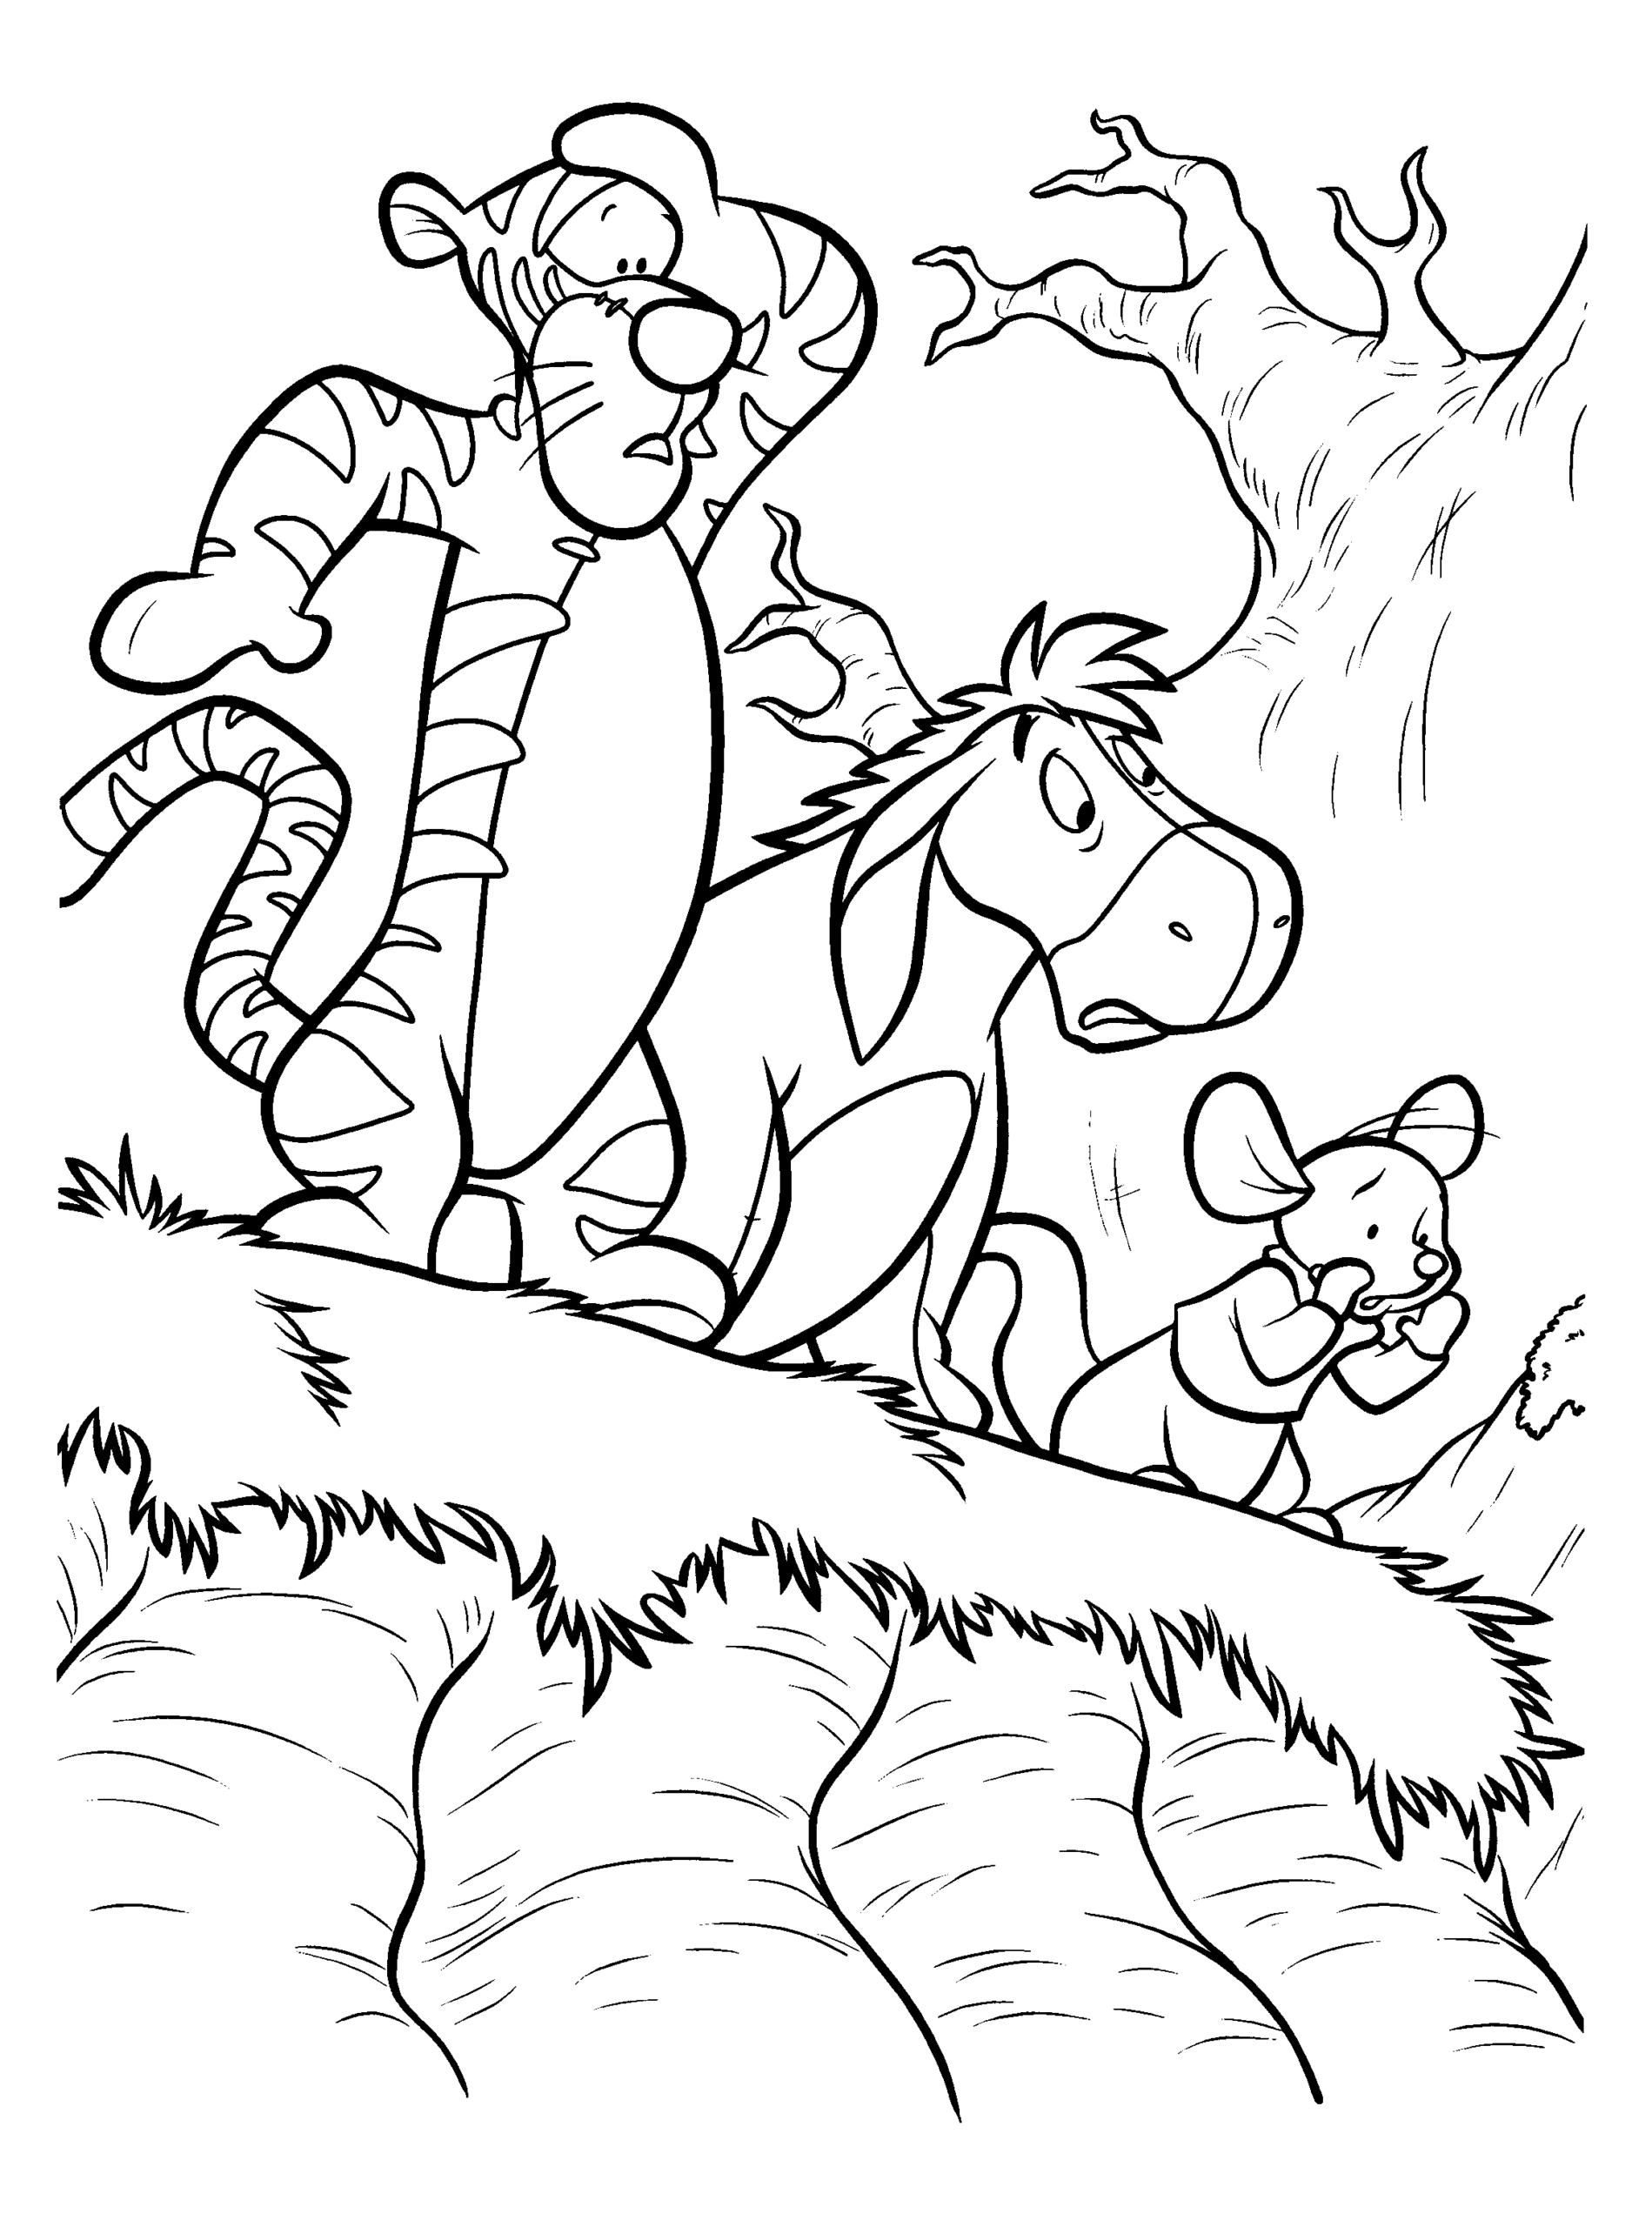 Winnie the Pooh Coloring Pages Cartoons winnie the pooh 6 Printable 2020 7175 Coloring4free